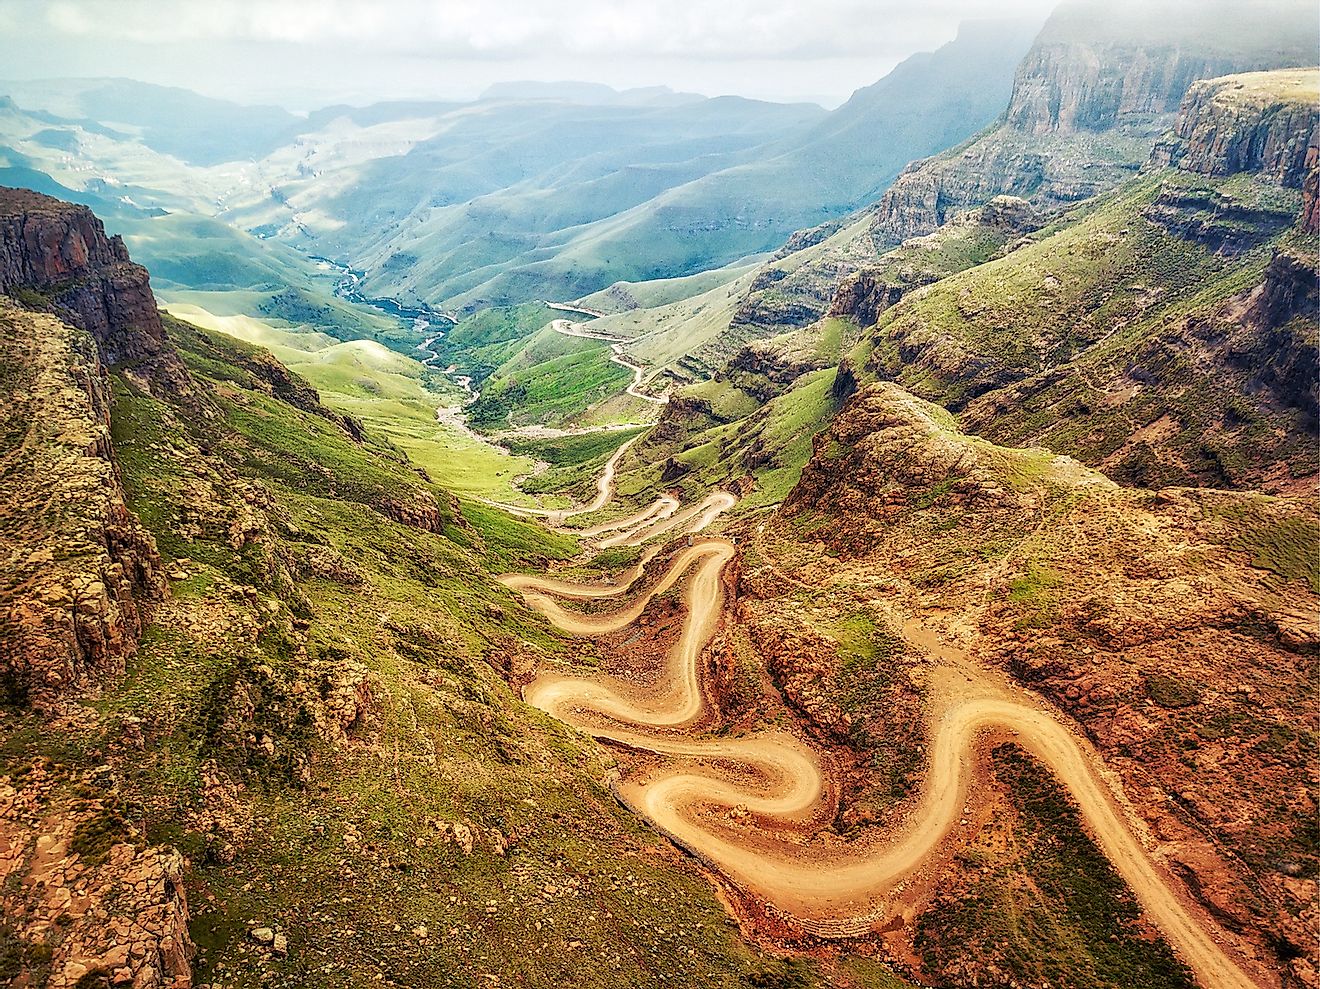 Sani Pass down into South Africa. Image credit: Lukas Bischoff Photograph/Shutterstock.com